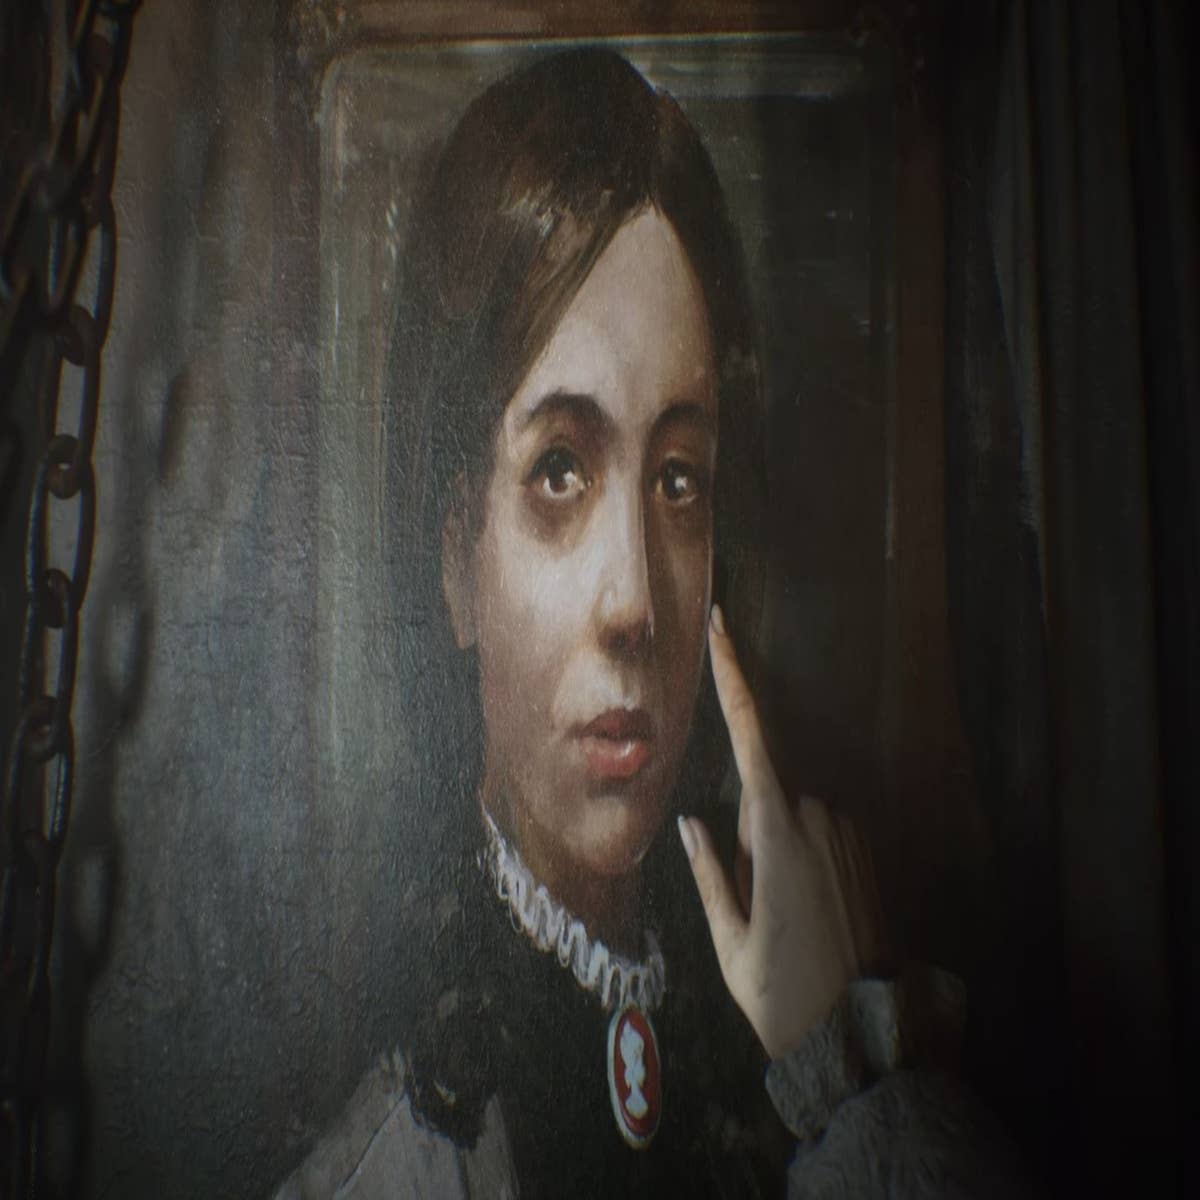 Layers of Fear for Nintendo Switch & PS4 - Limited Game News